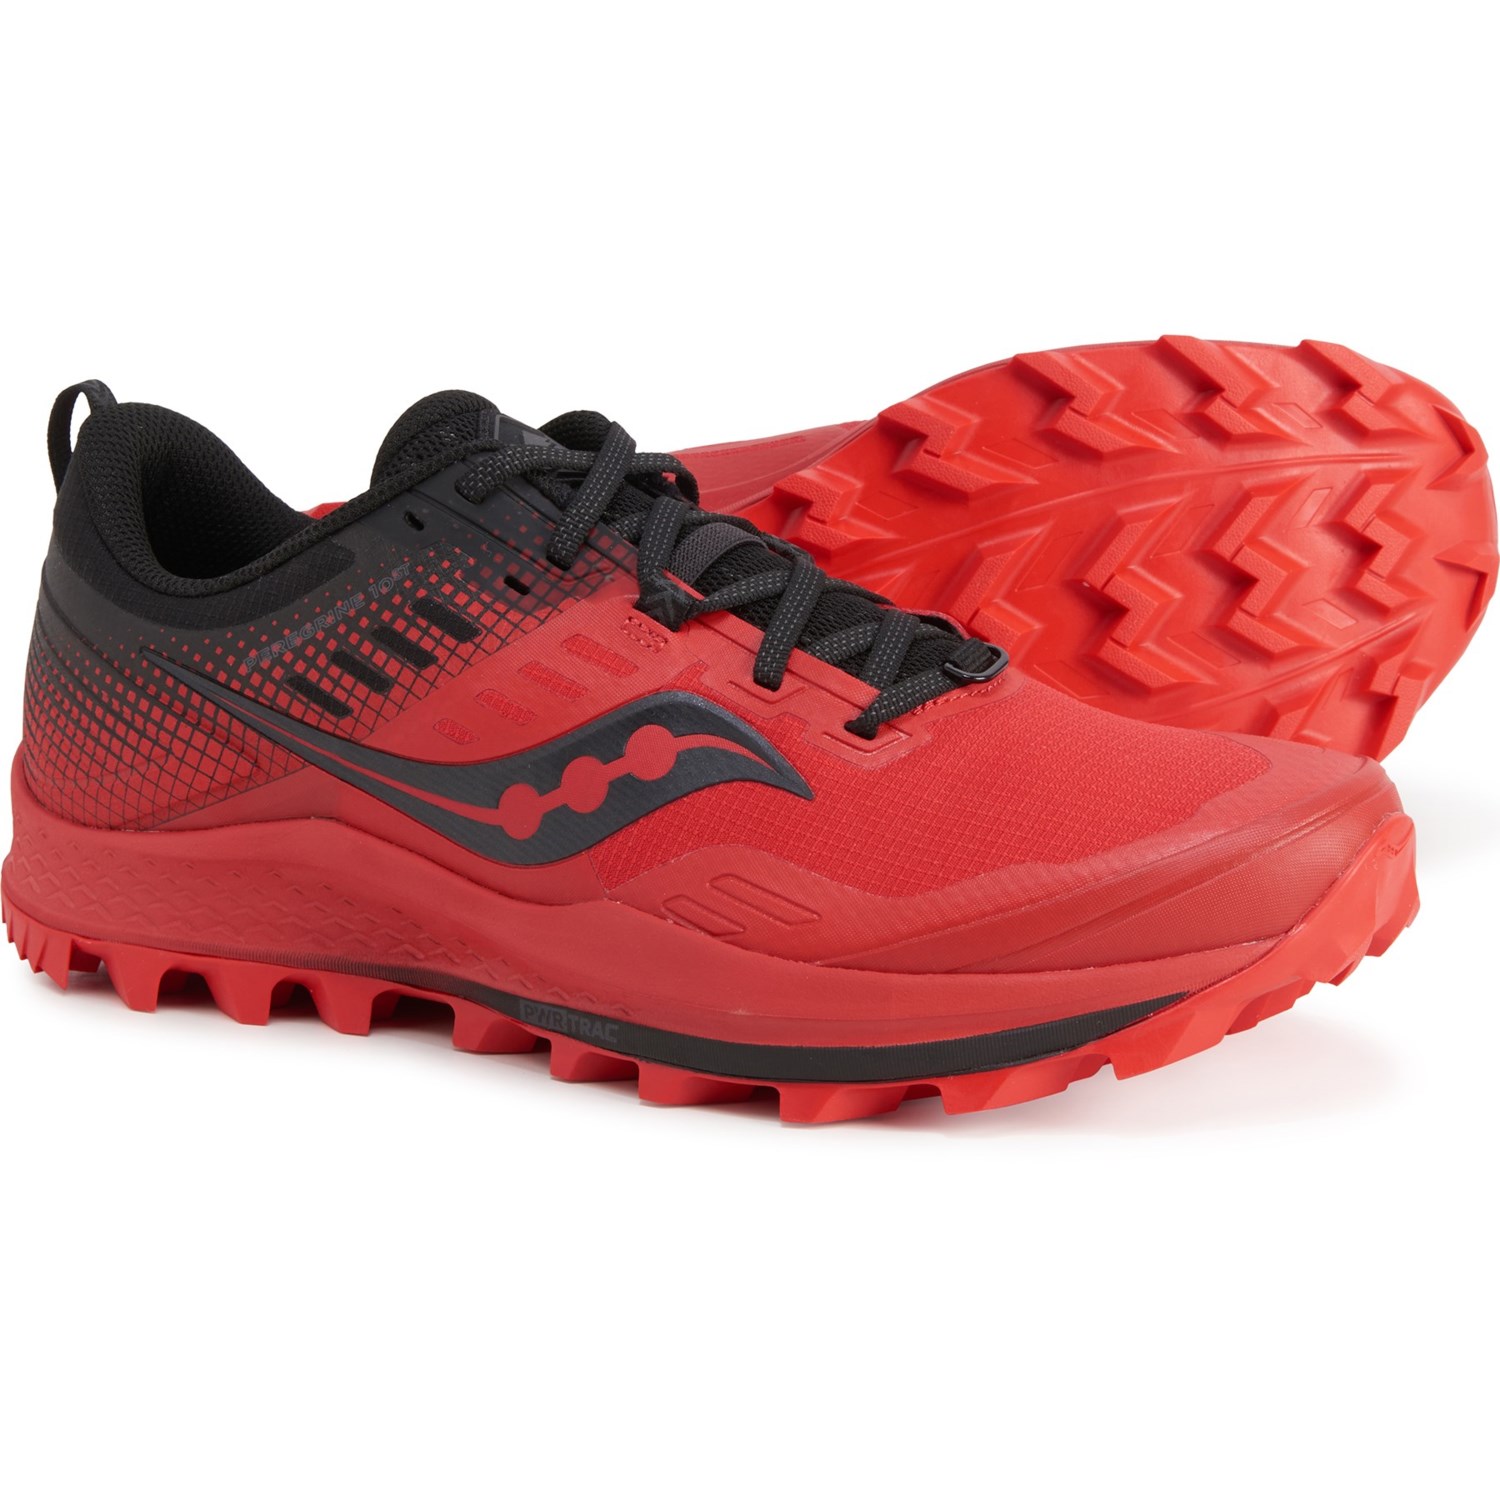 saucony-peregrine-10-st-trail-running-shoes-for-men-in-red-black~p~30ykn_01~1500.1314.jpg